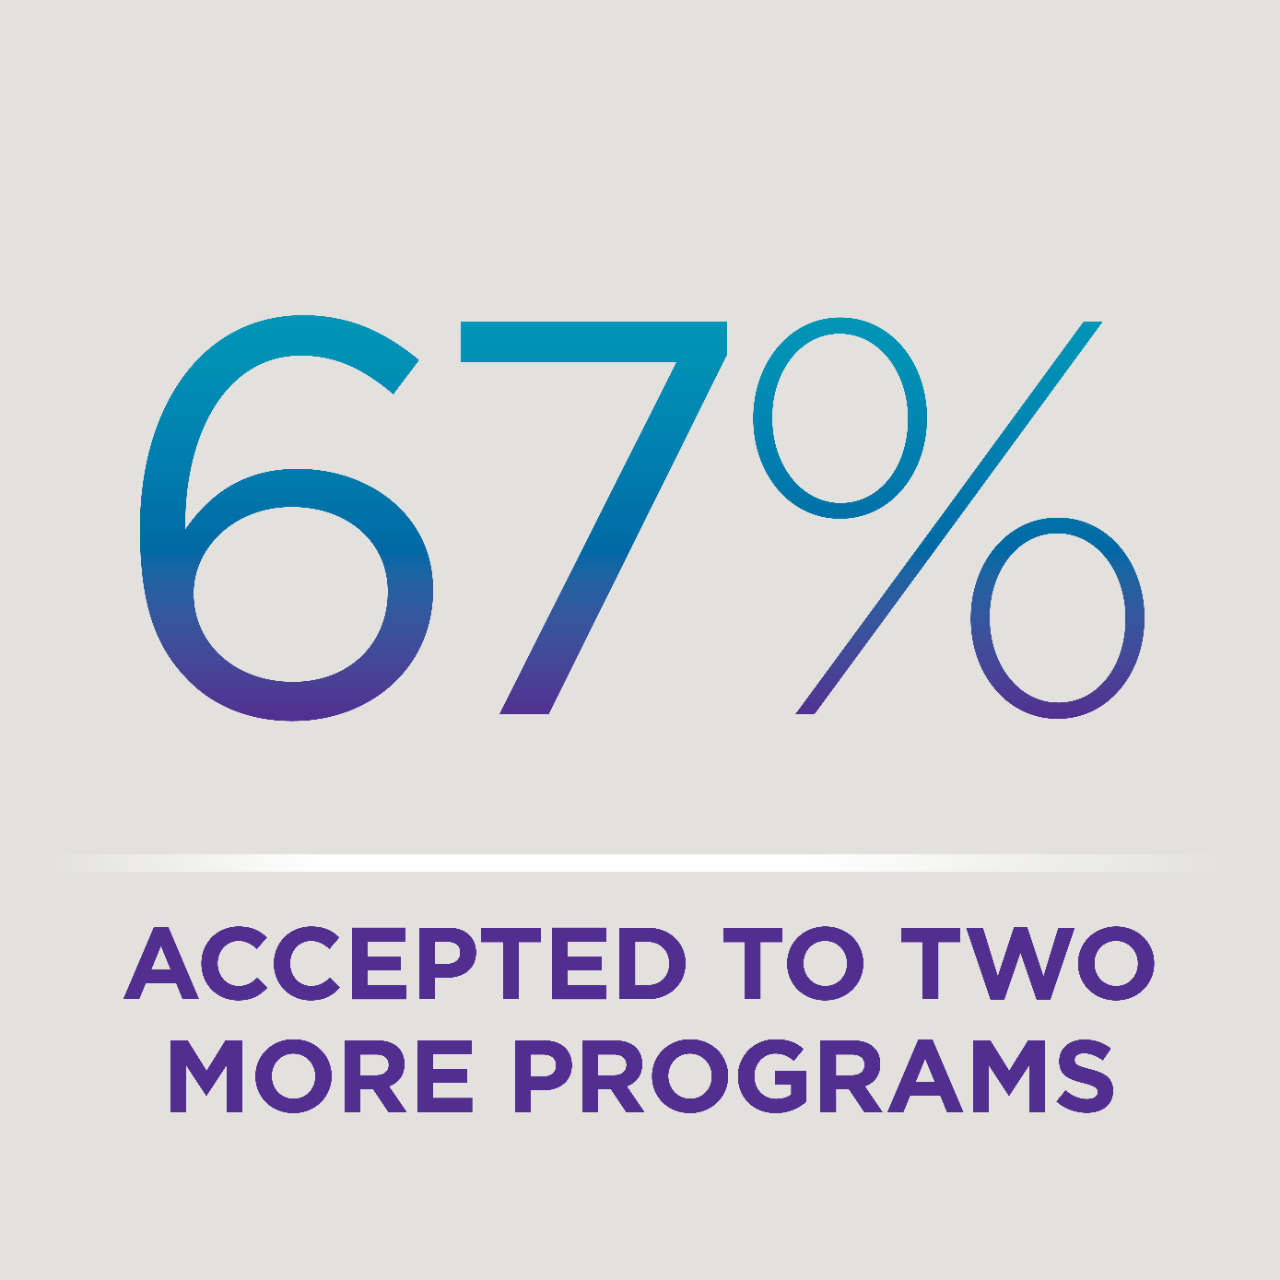 67% accepted to two more programs.